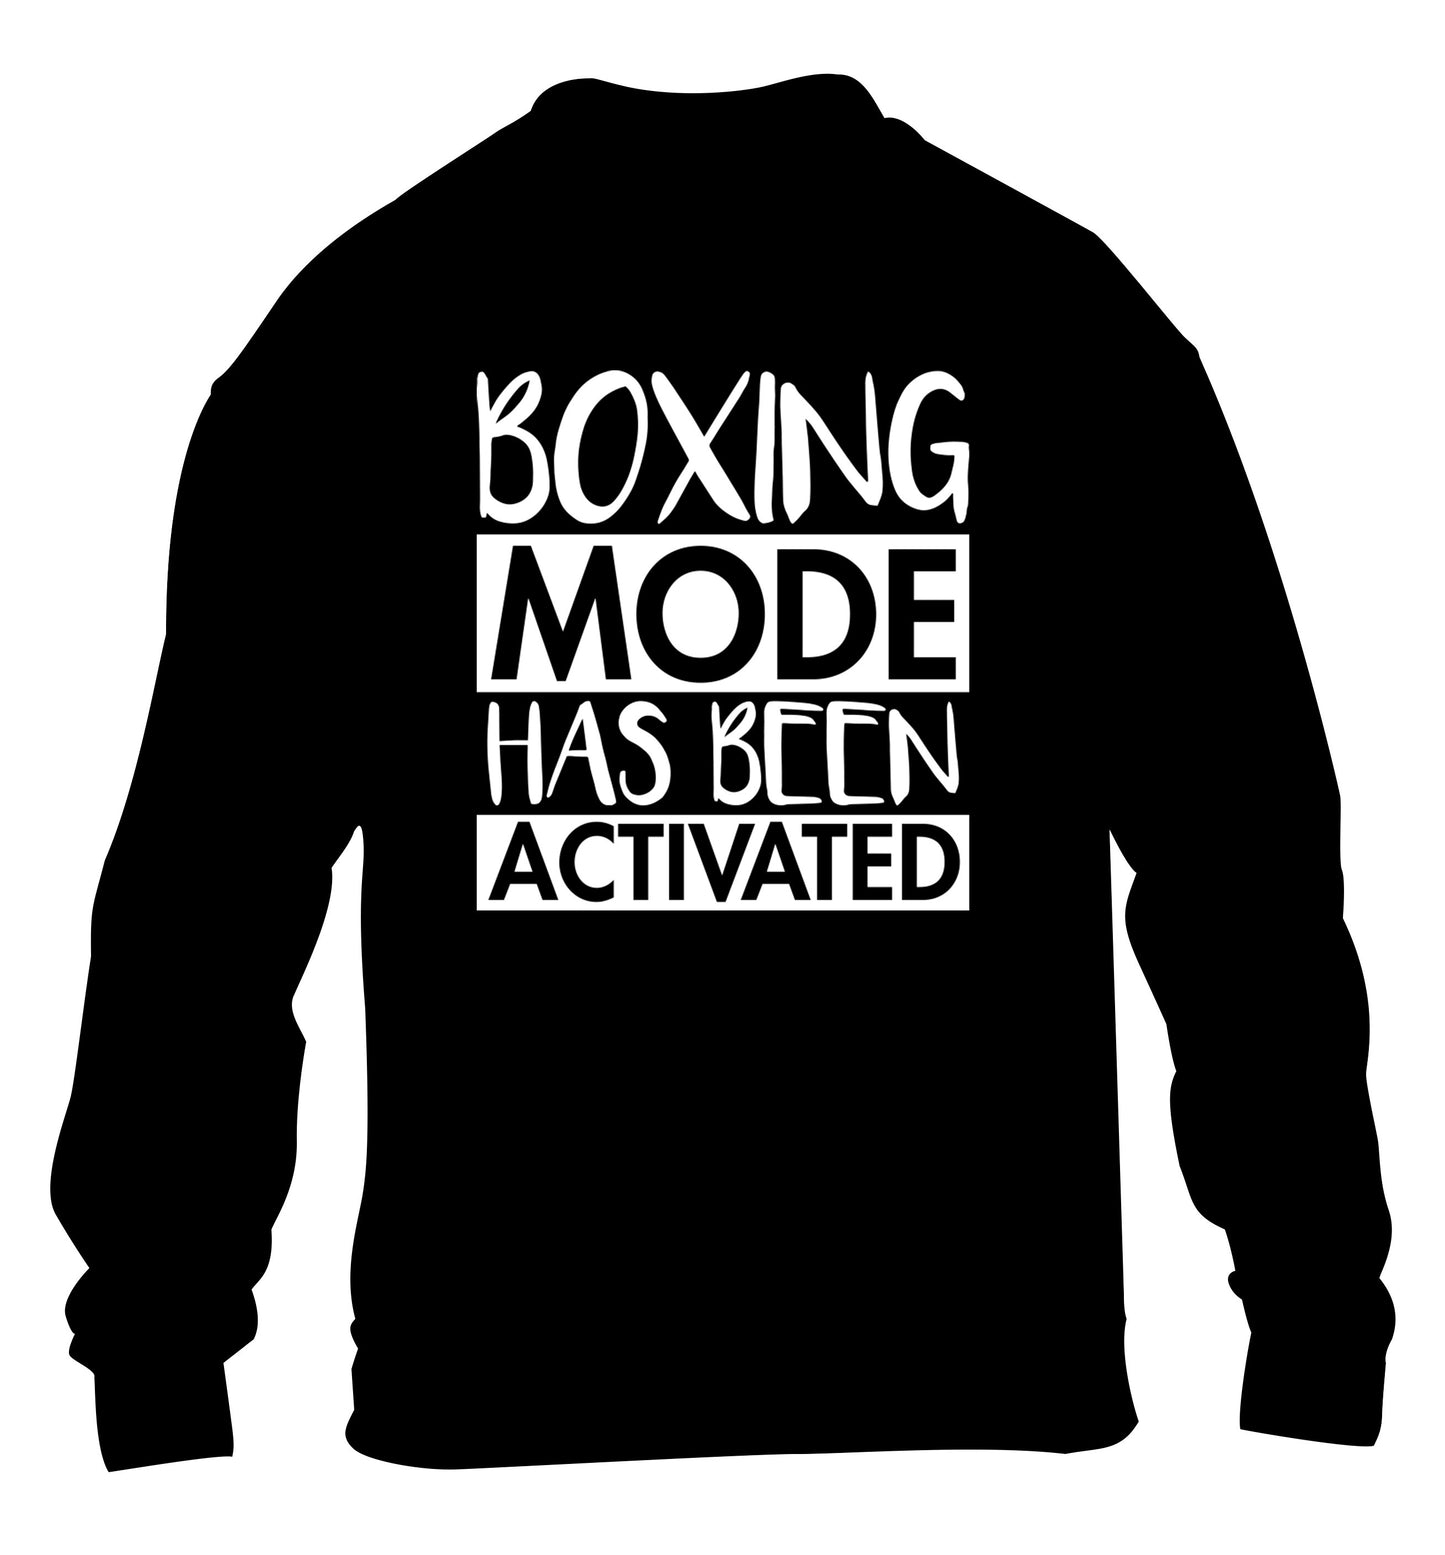 Boxing mode activated children's black sweater 12-14 Years